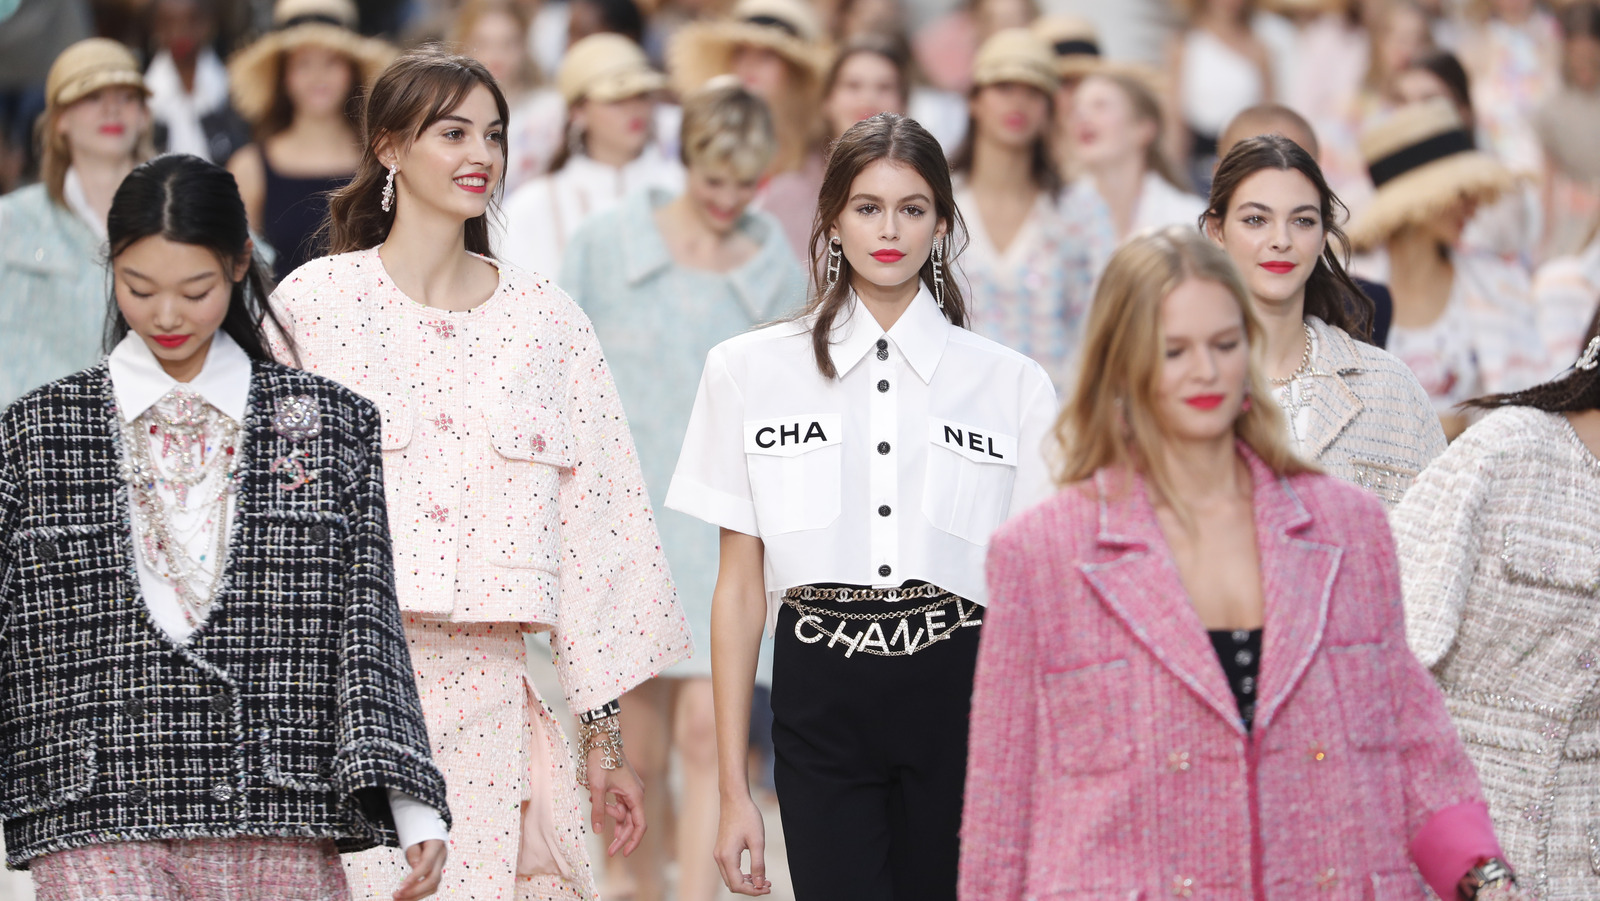 Ready-To-Wear Fashion: What Does The Term Mean?